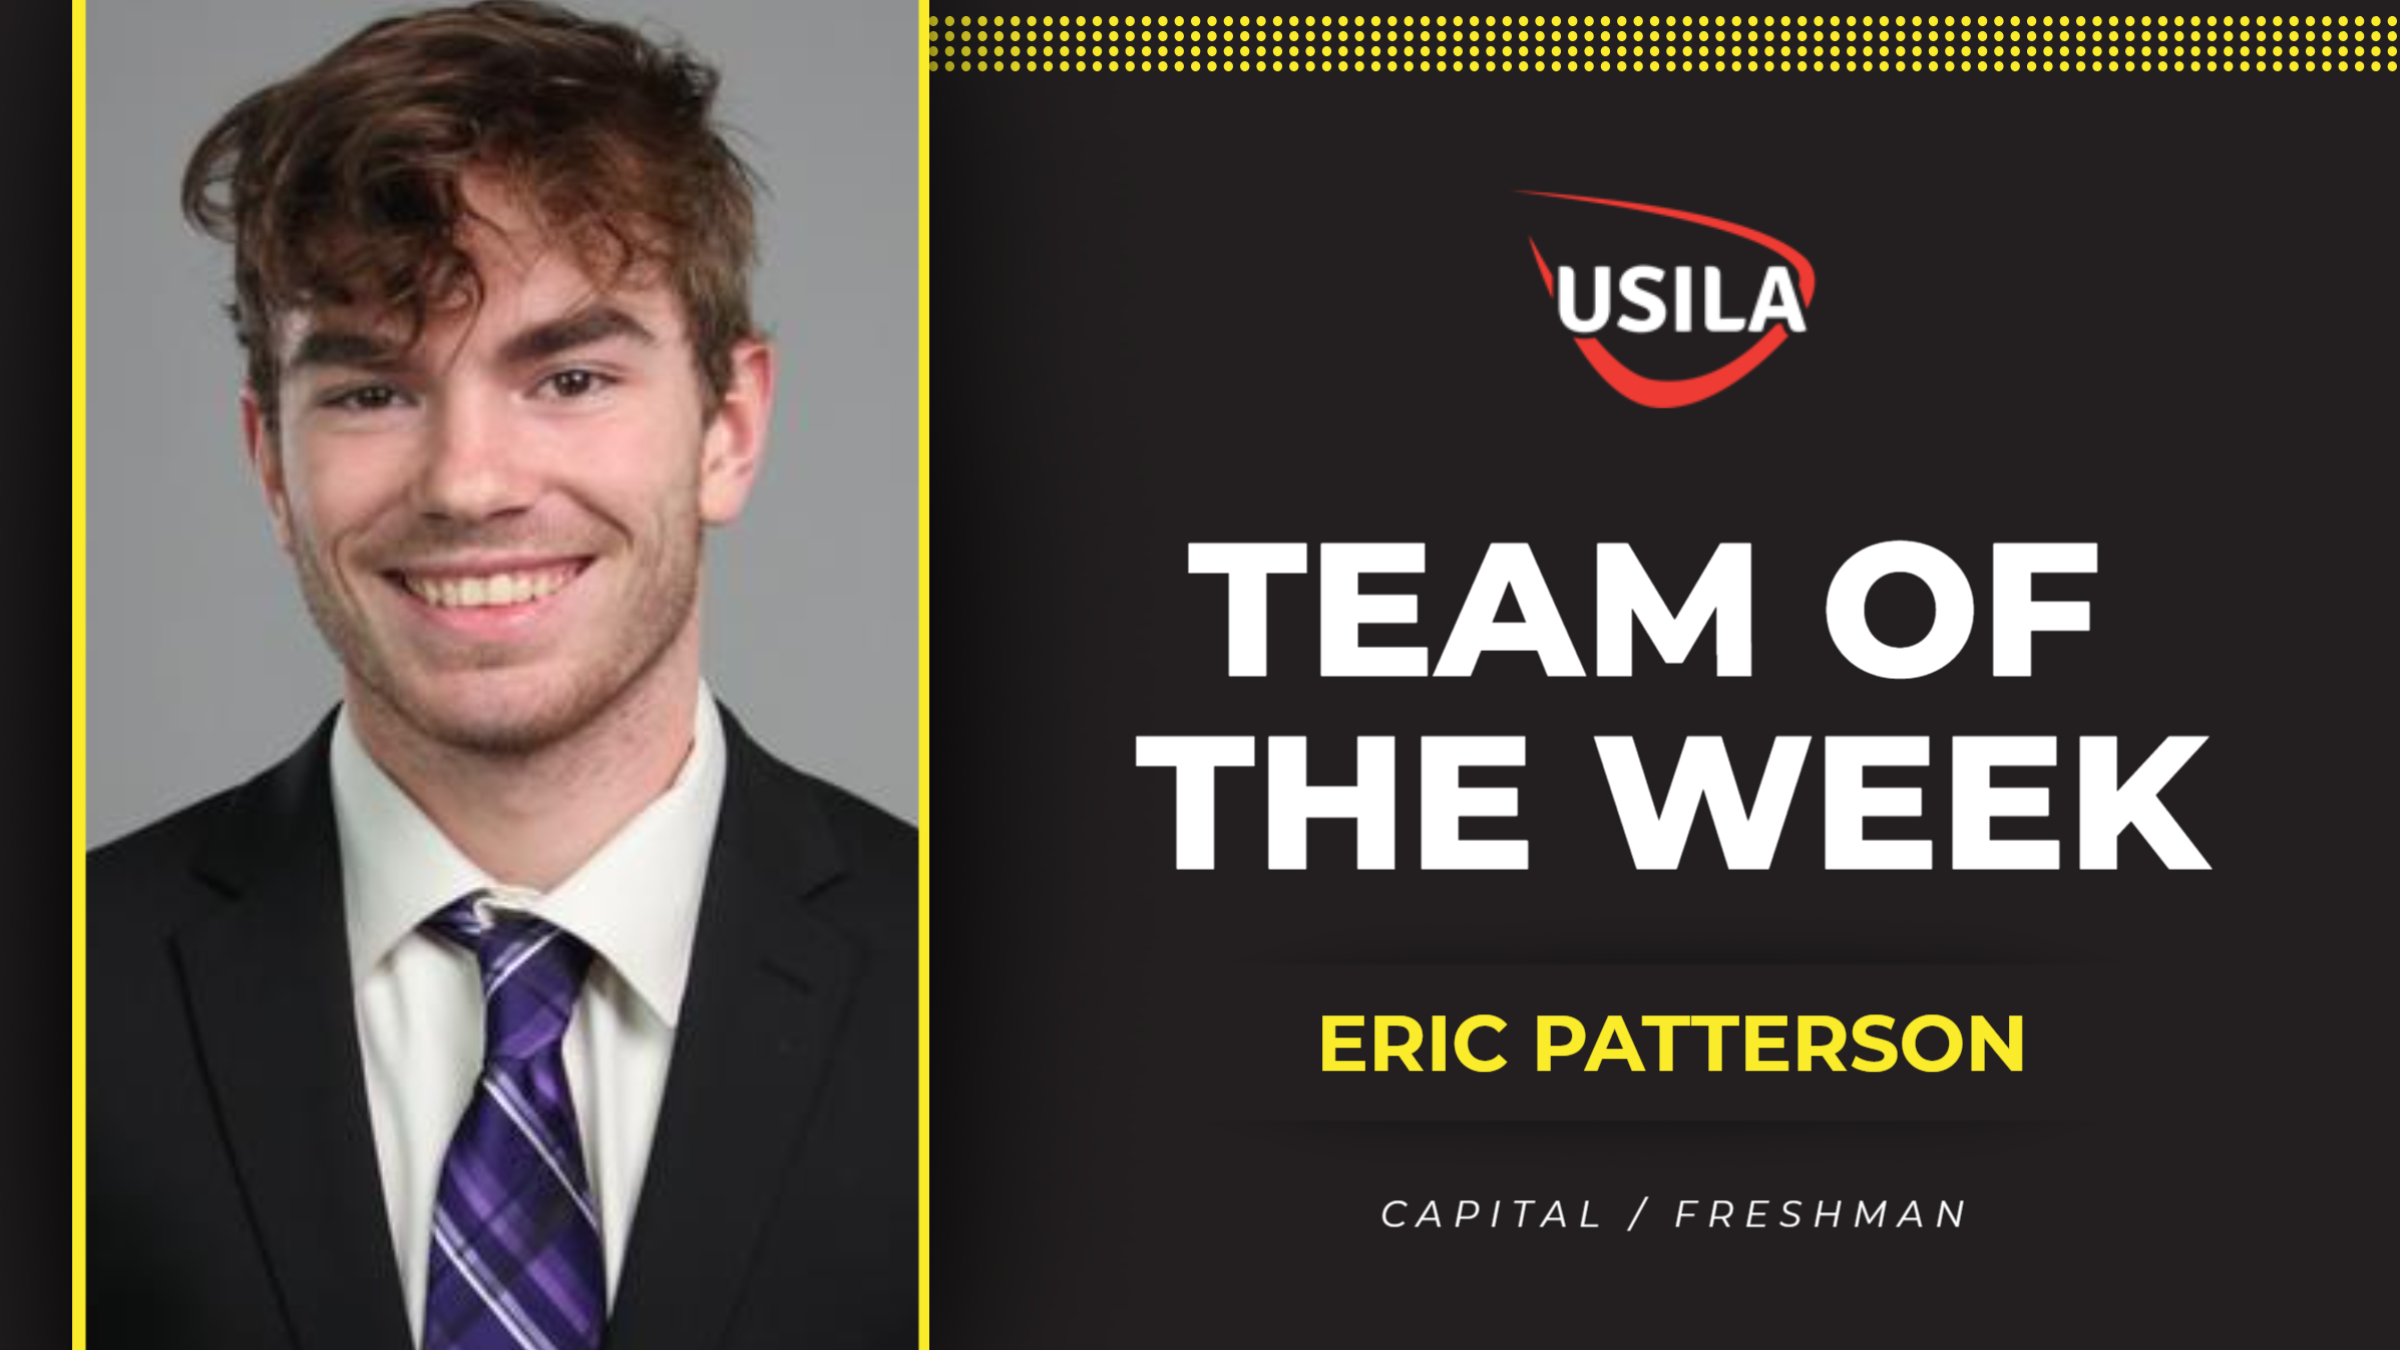 Capital's Patterson Repeats on USILA Team of the Week